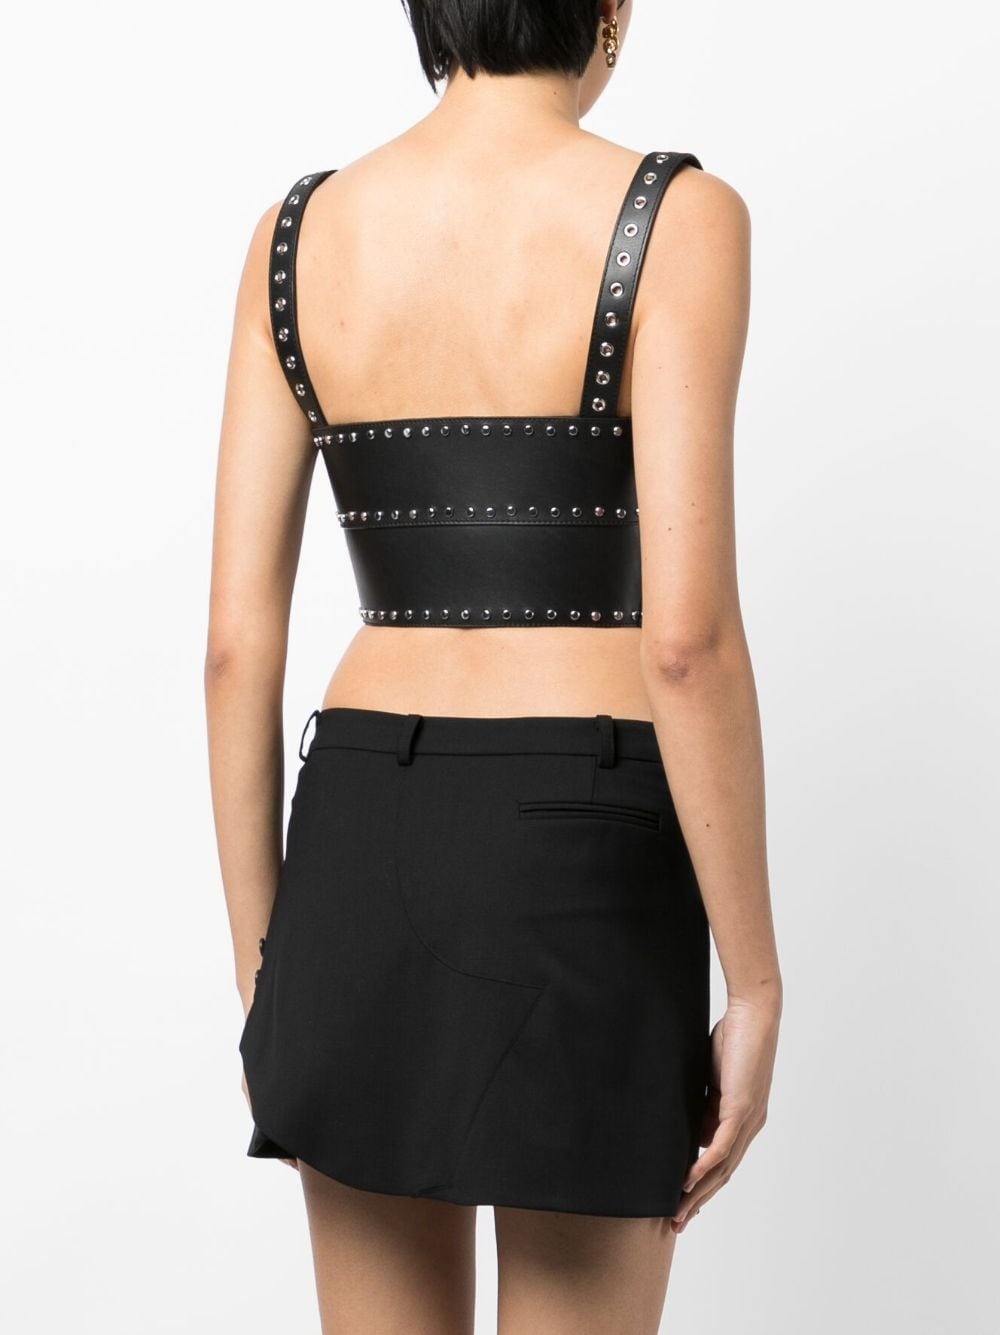 stud-detail leather bustier top - 4